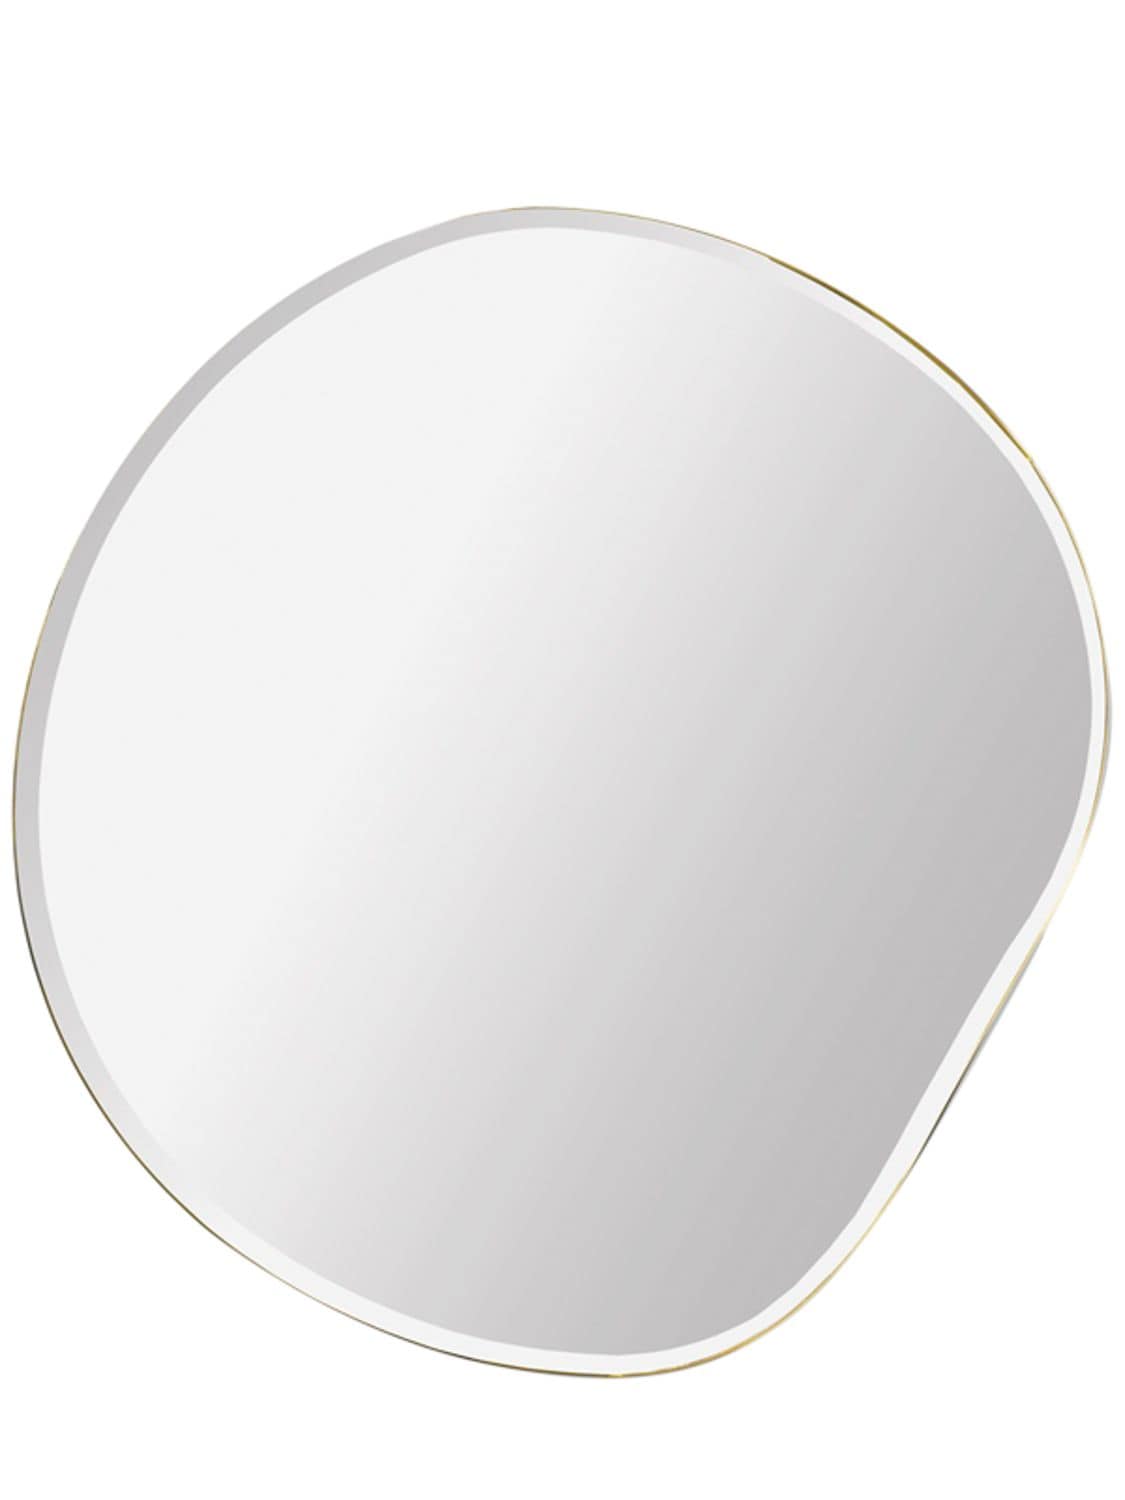 Image of Small Pond Mirror